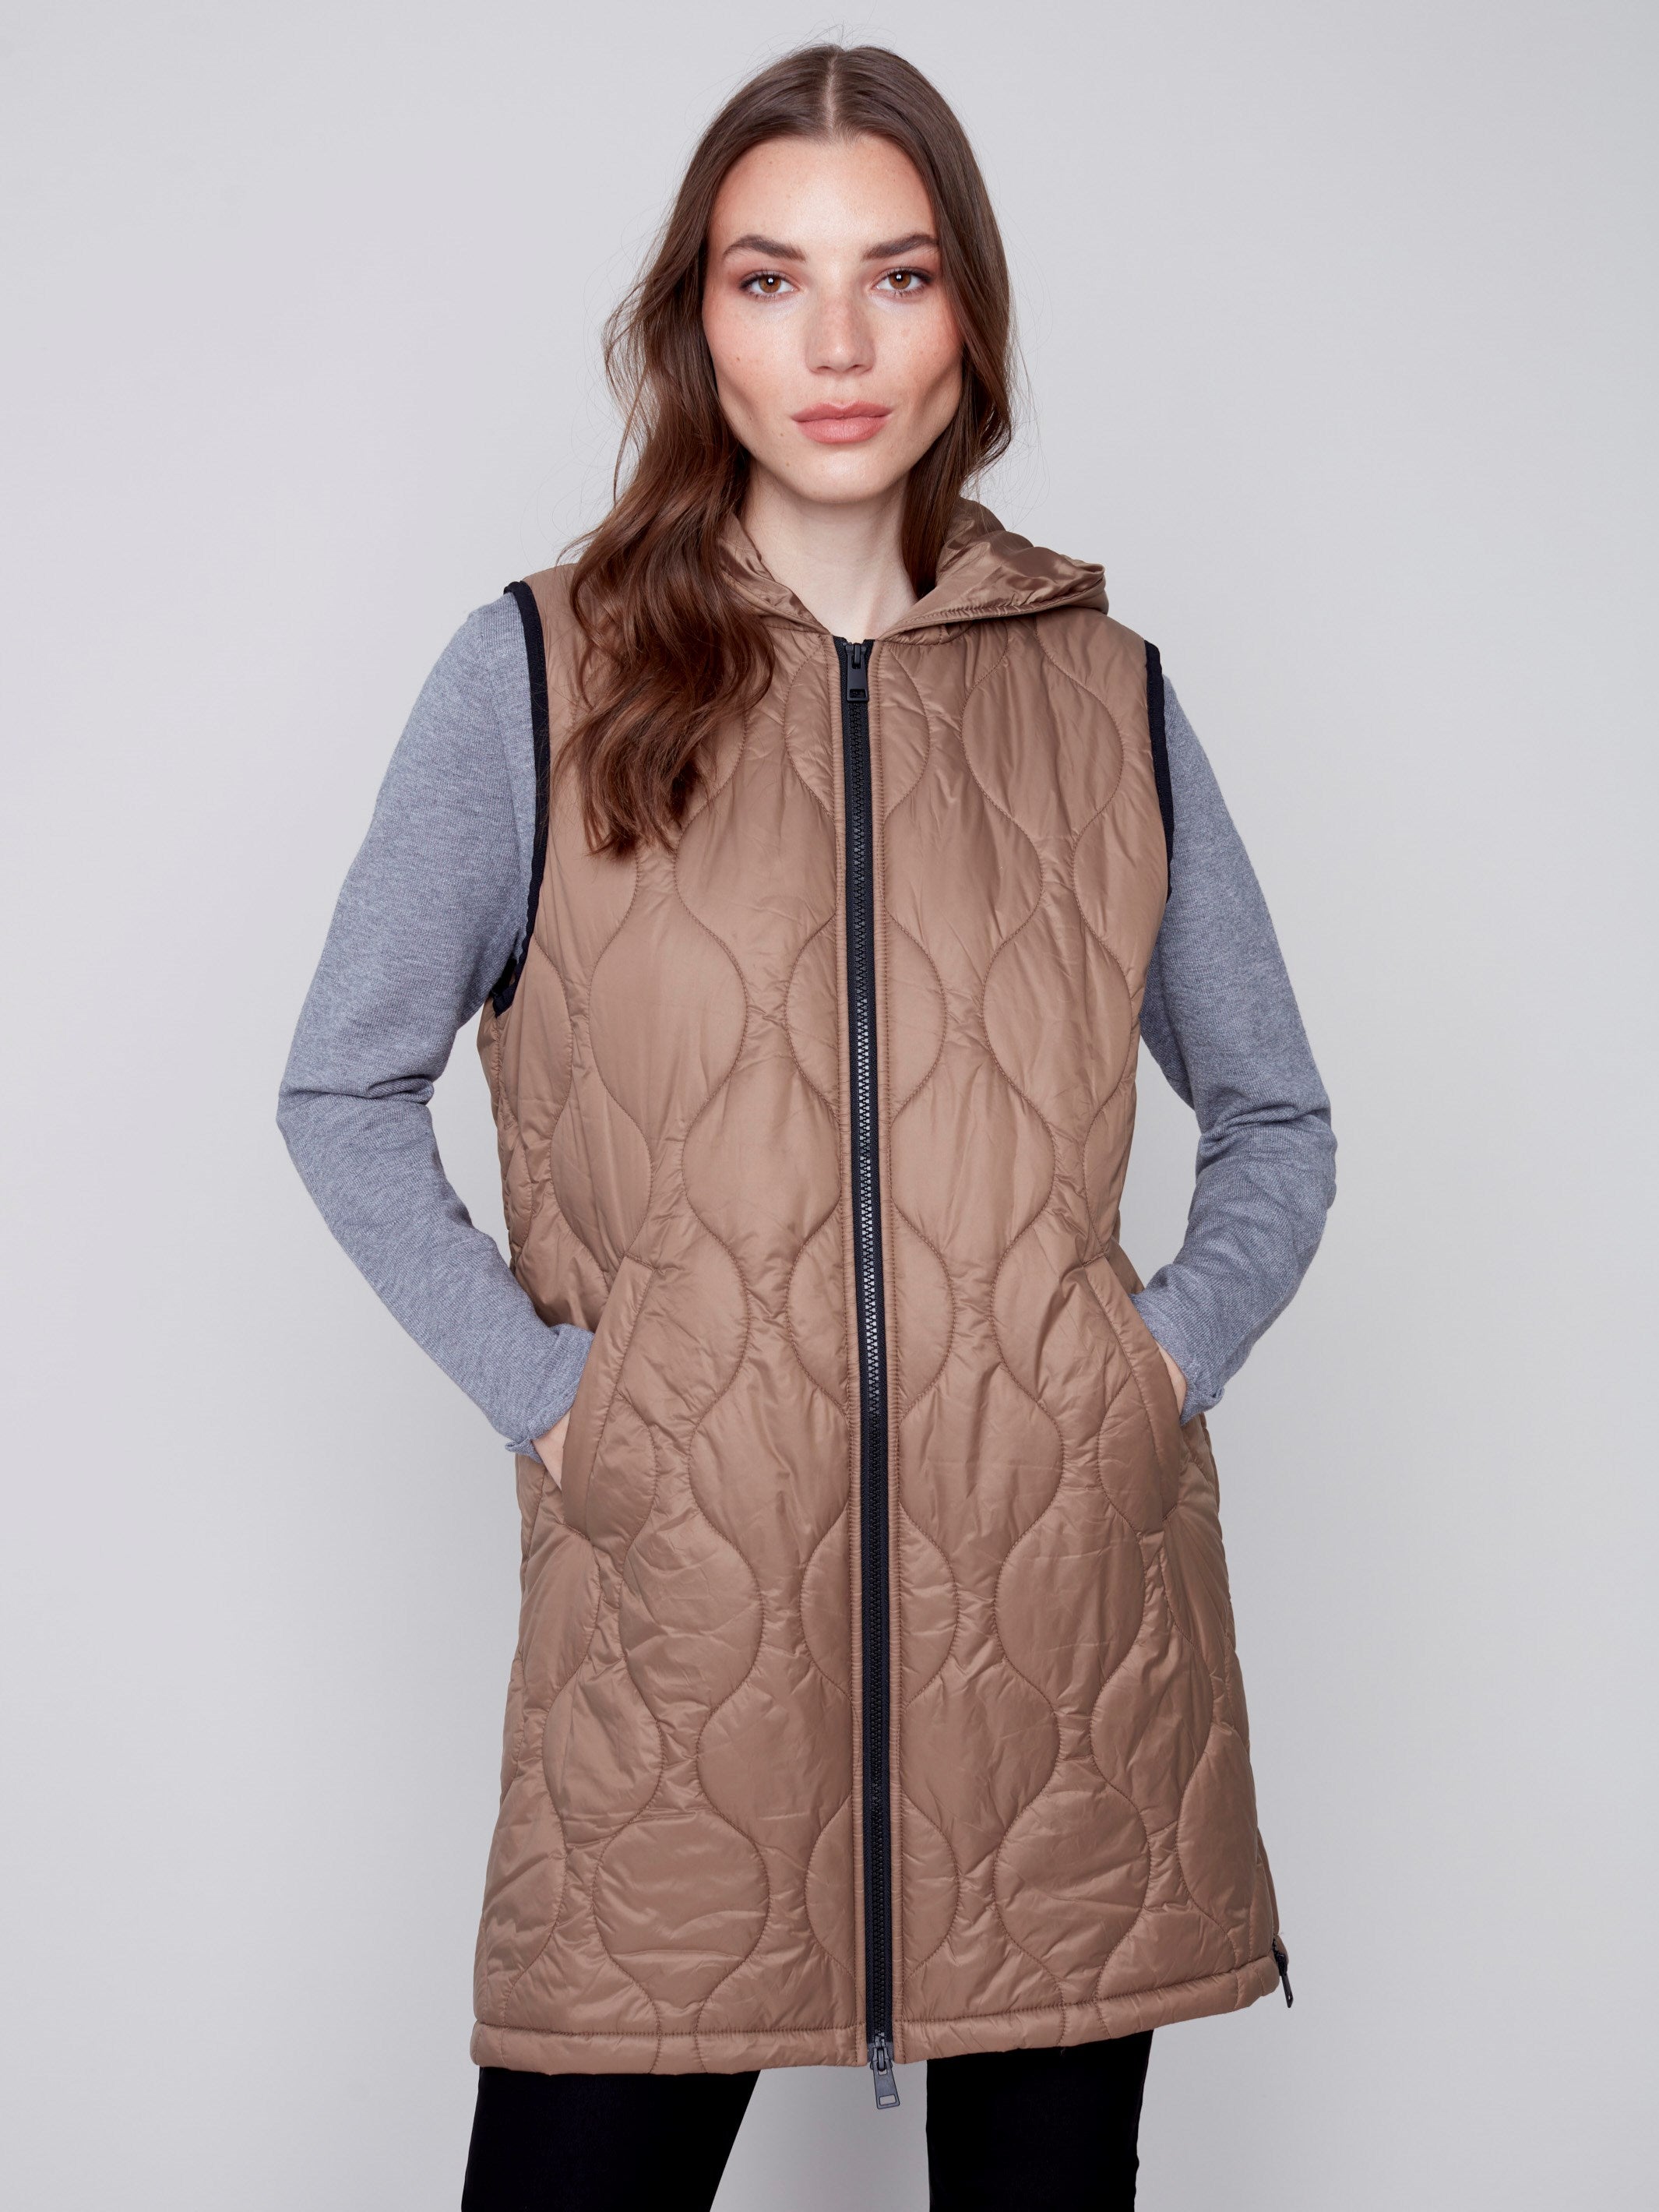 Long Quilted Puffer Vest with Hood - Truffle